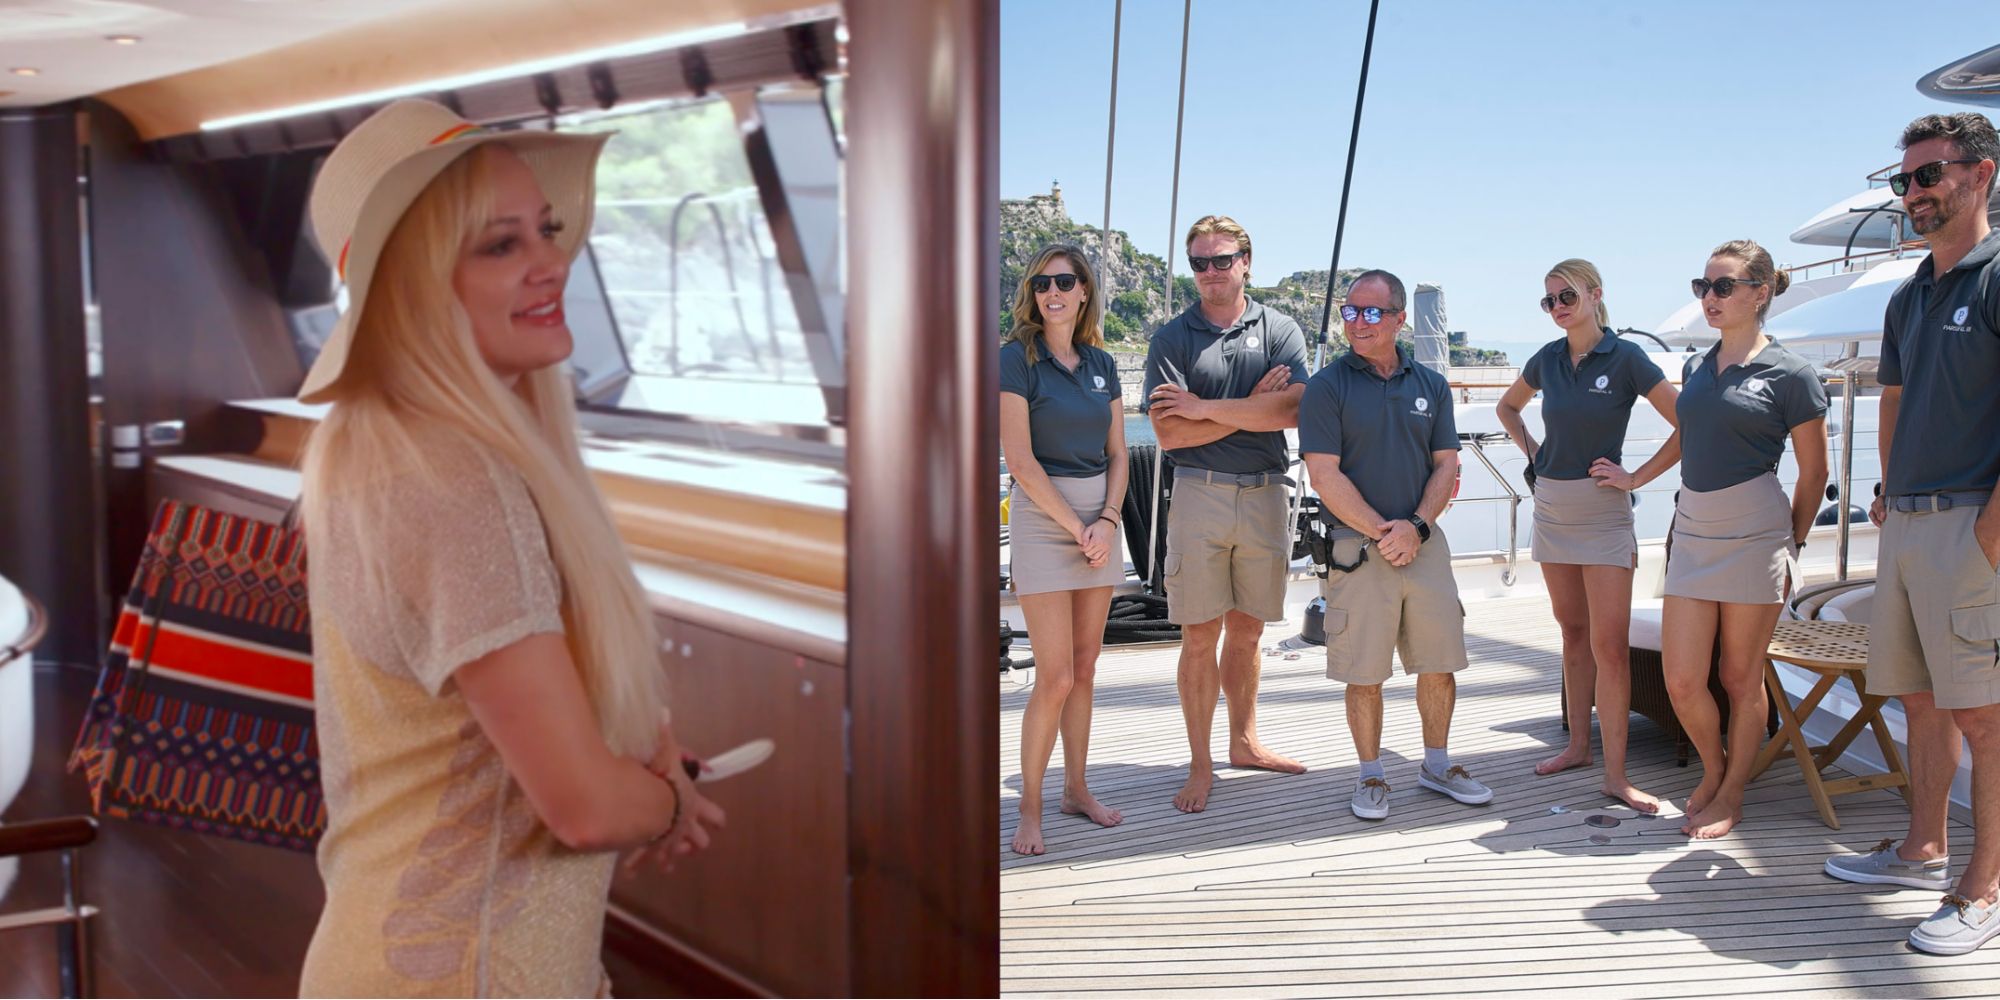 Split Image Erica Rose and the Below Deck Sailing Yacht Crew